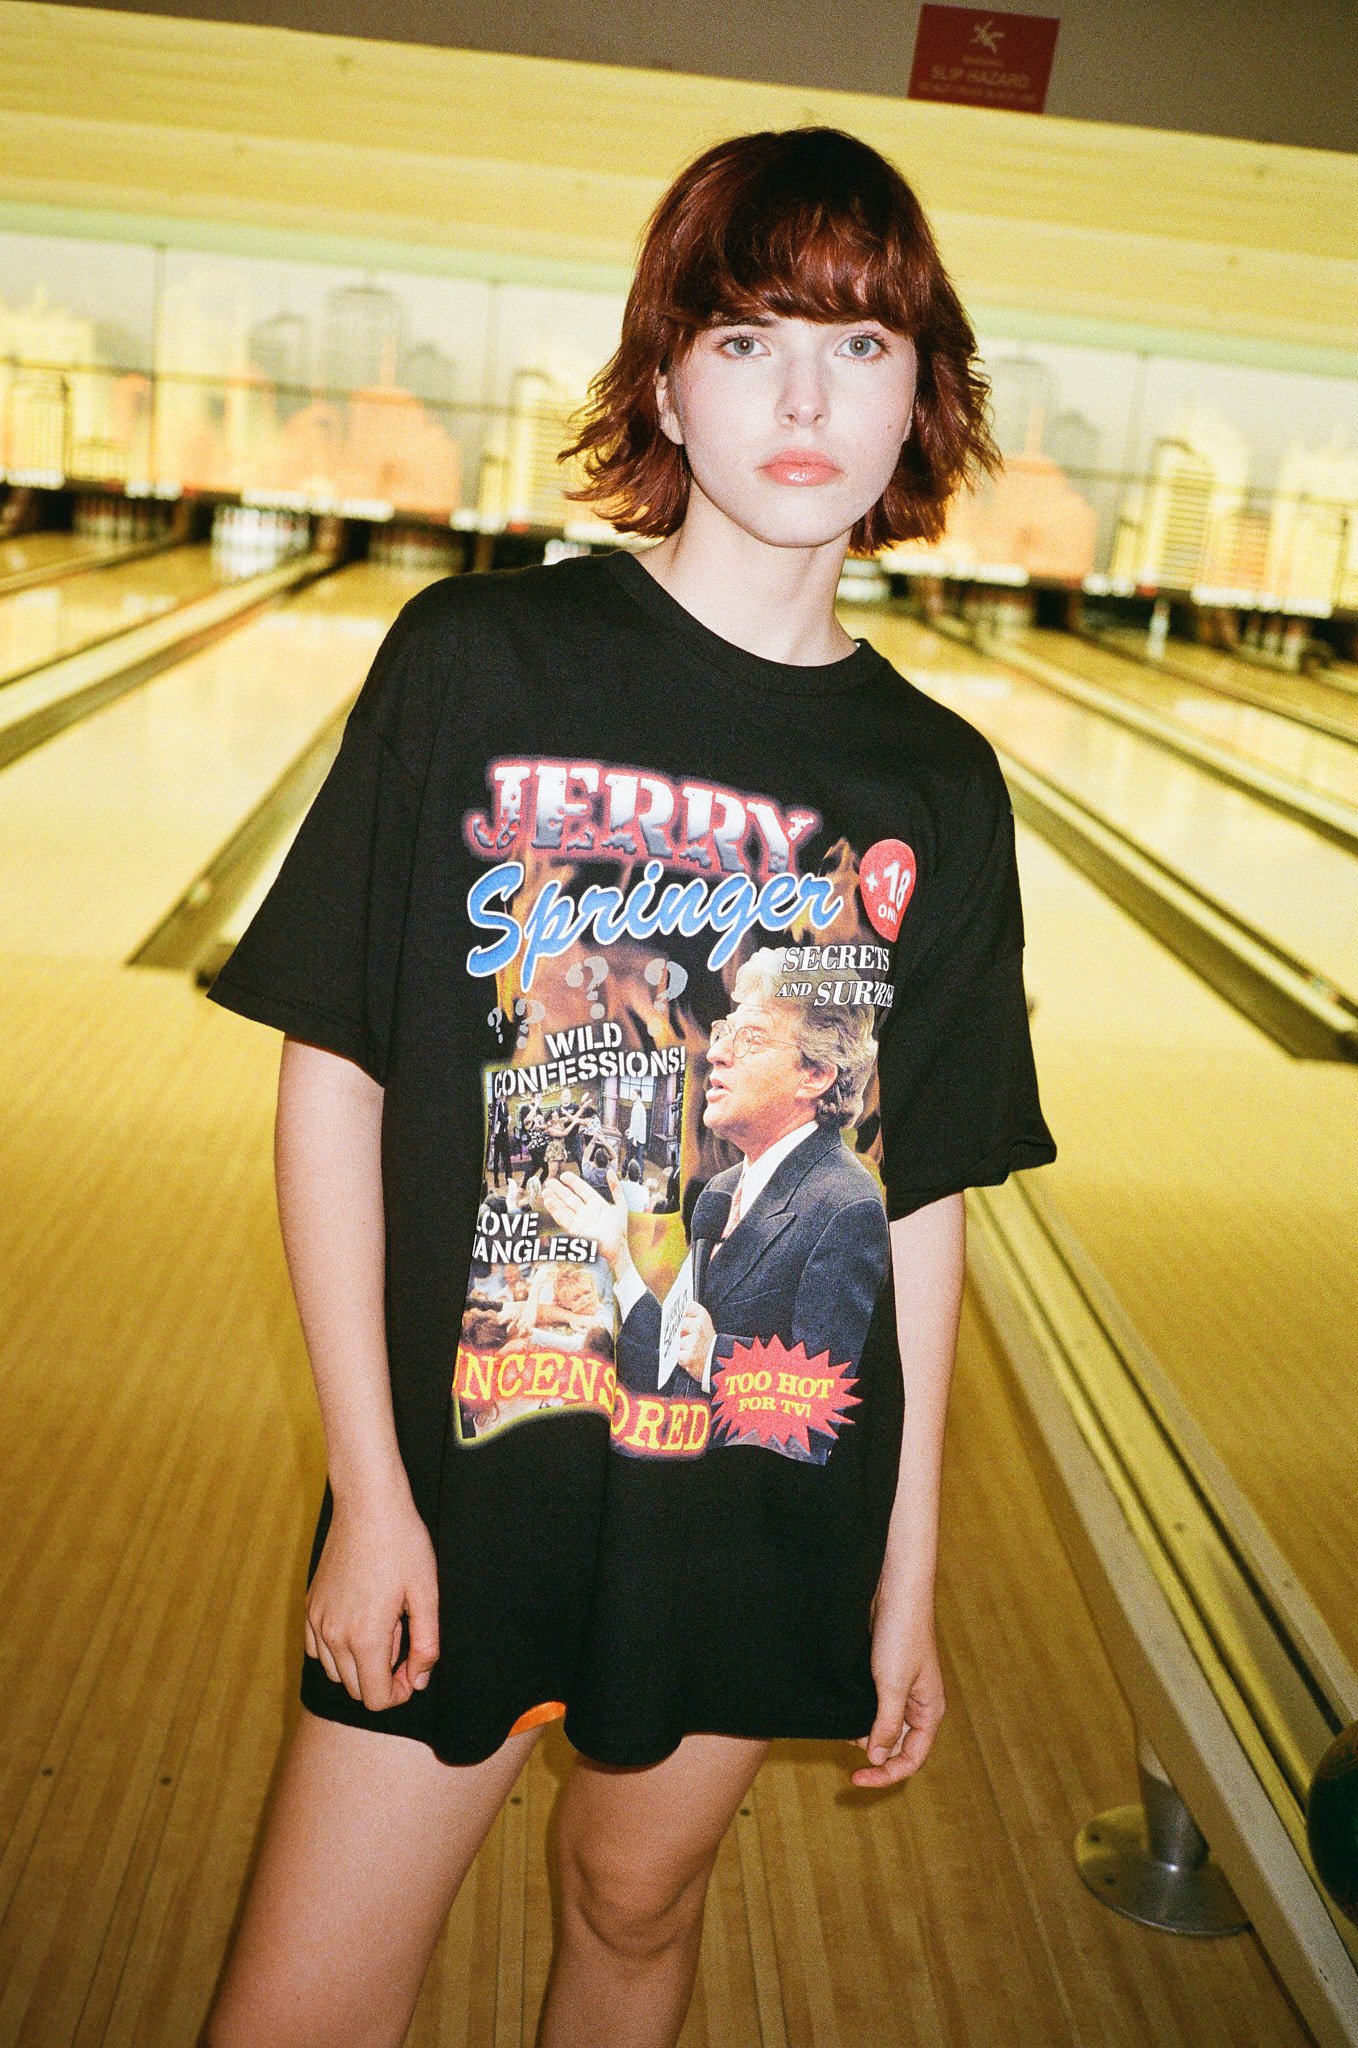 2023_0703_BrookeCharlese_Bowling_35mm_SELECTS_1.jpg